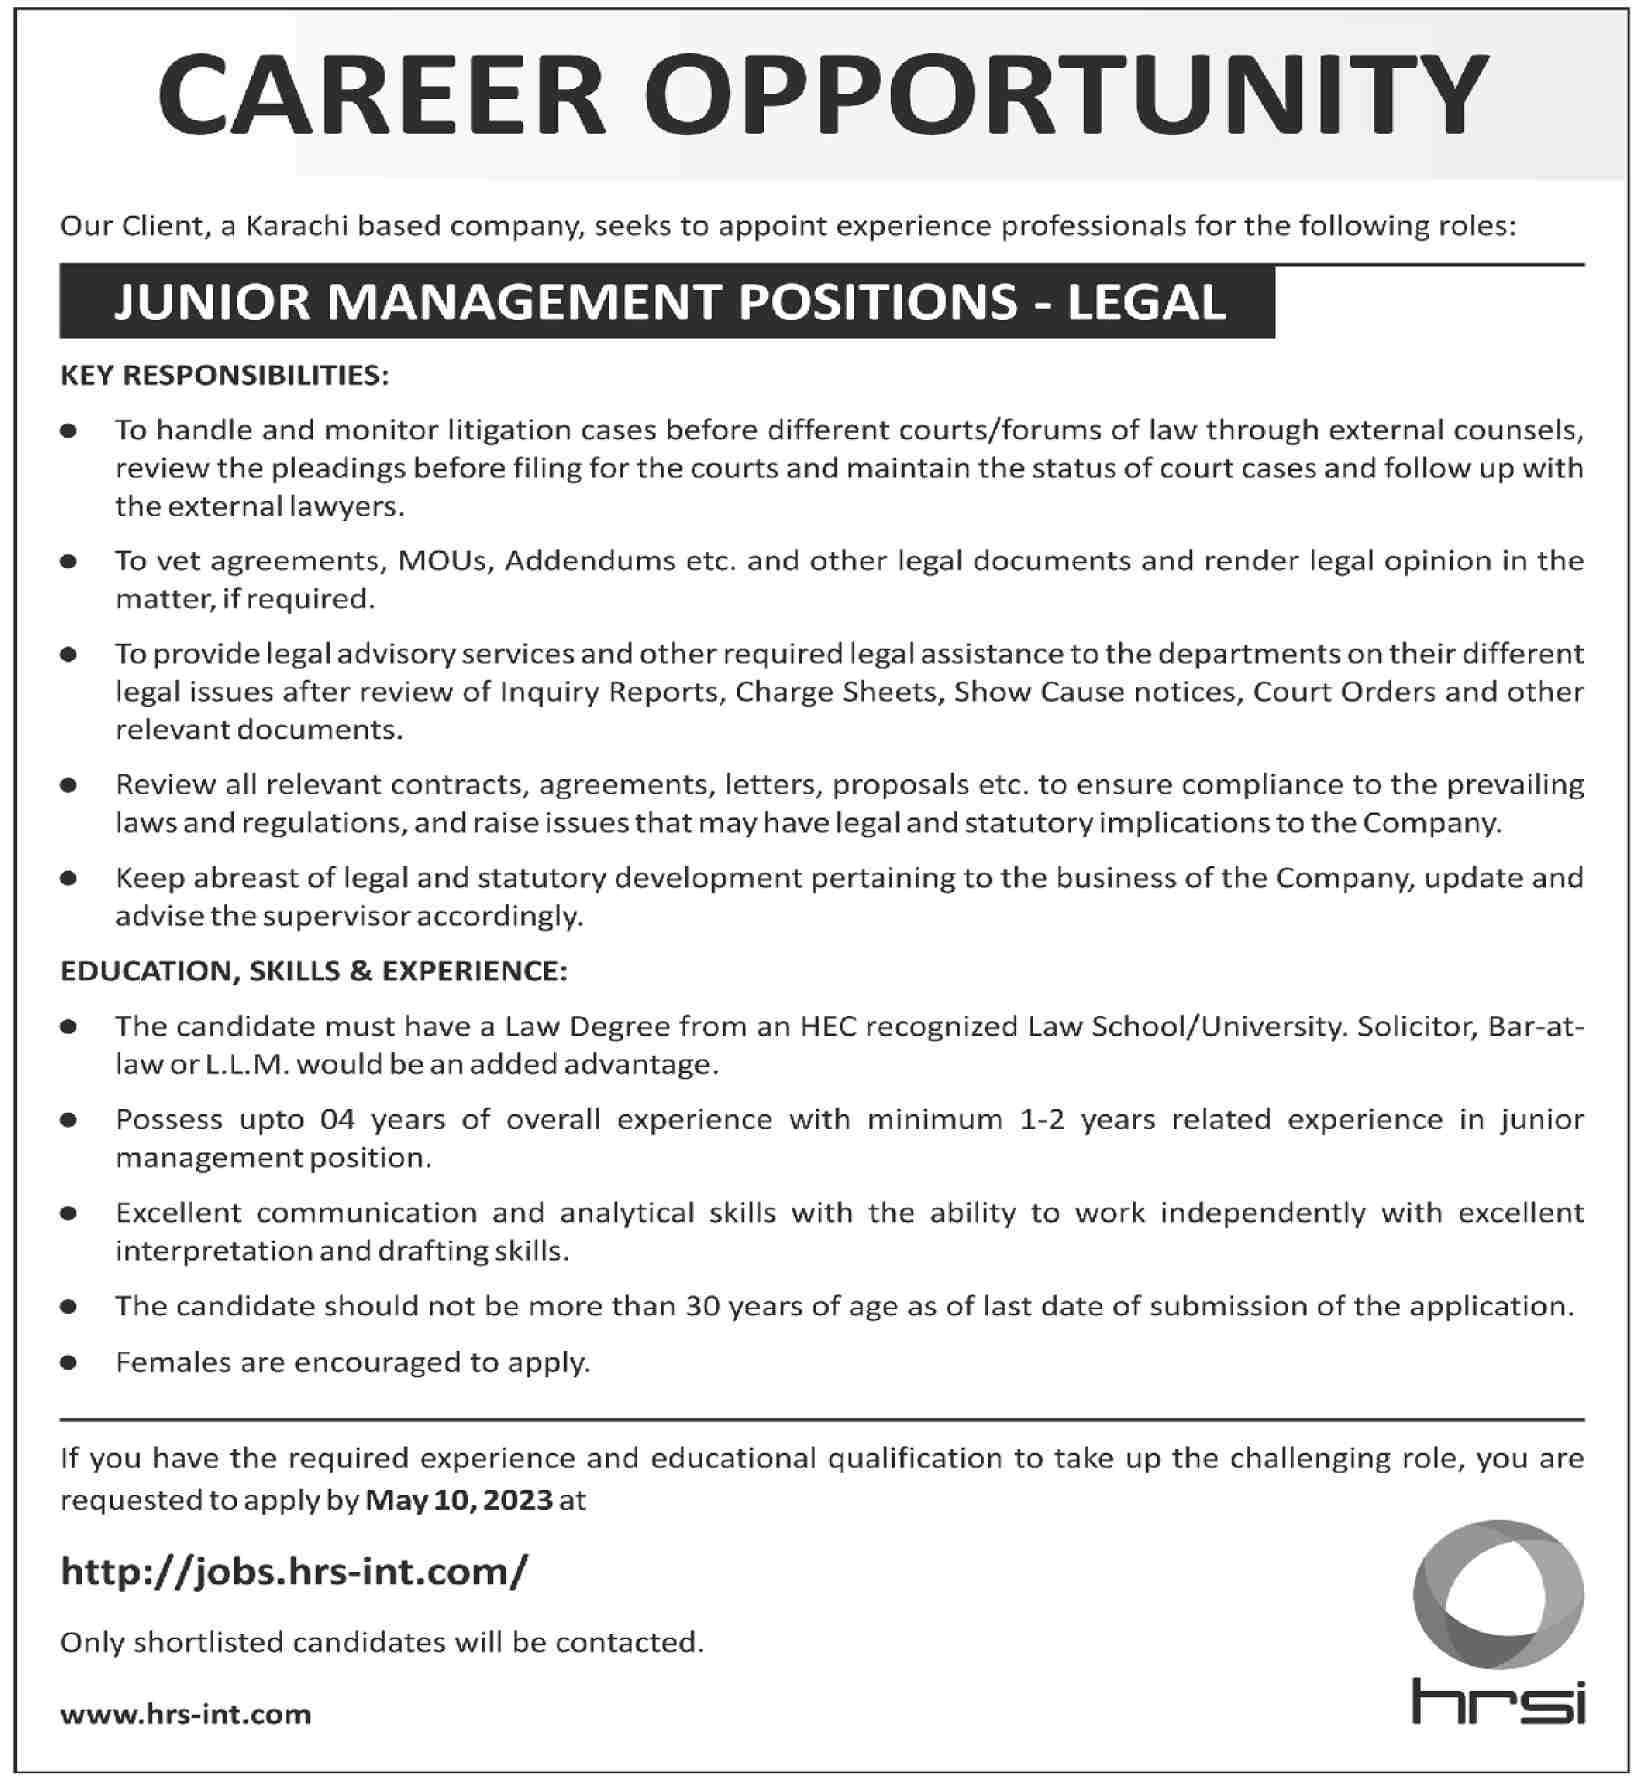 Legal Jobs Opportunities in HRSI